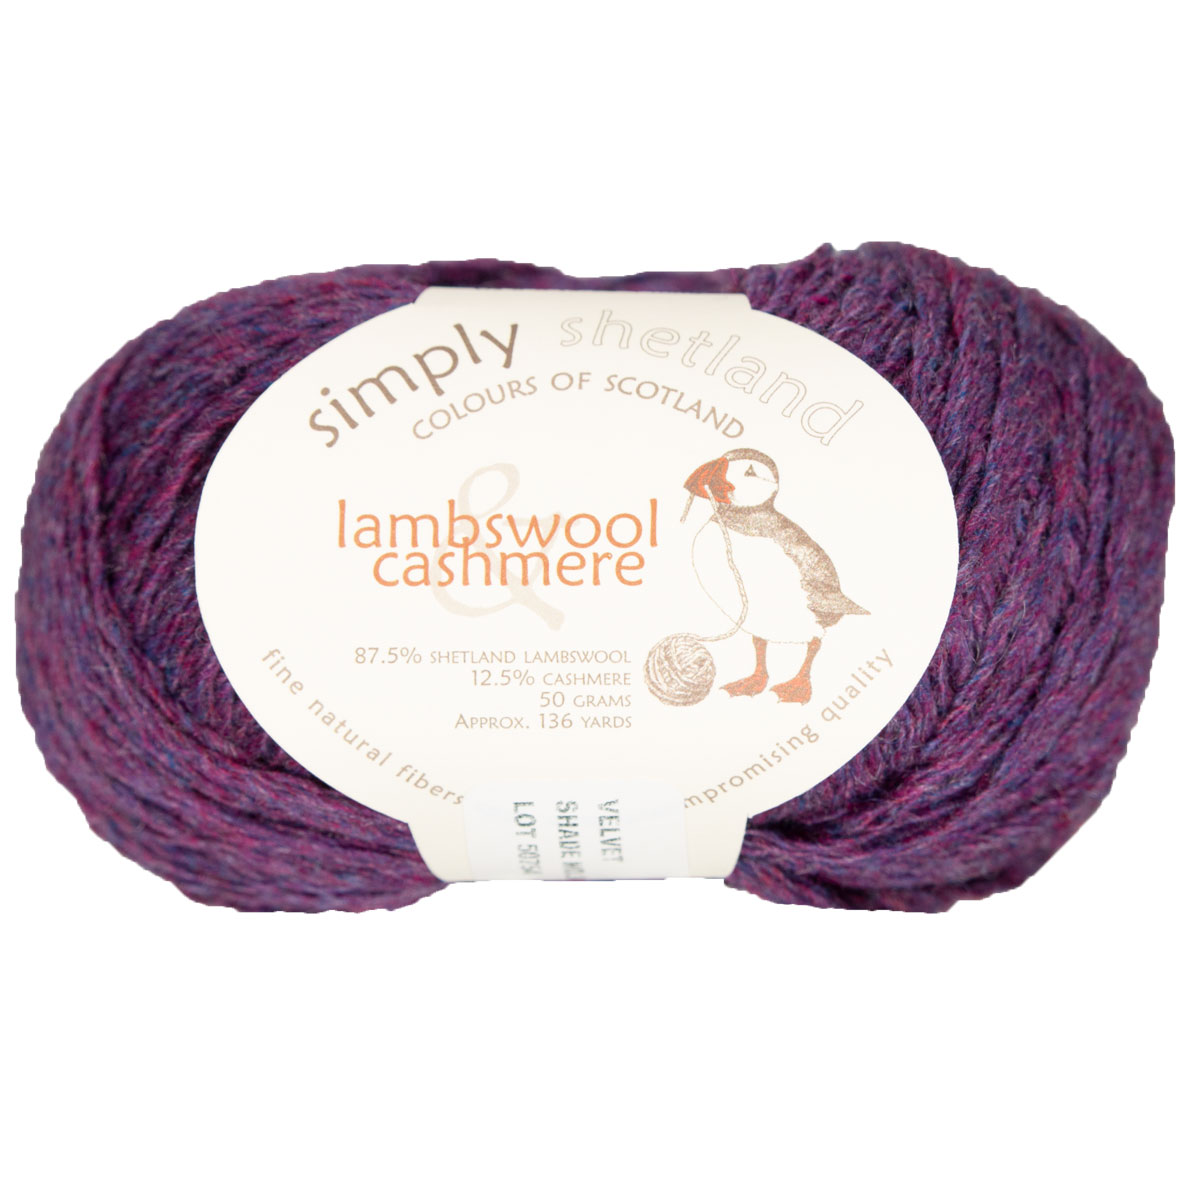 Simply Shetland Lambswool & Cashmere Yarn - 45 Clio at Jimmy Beans